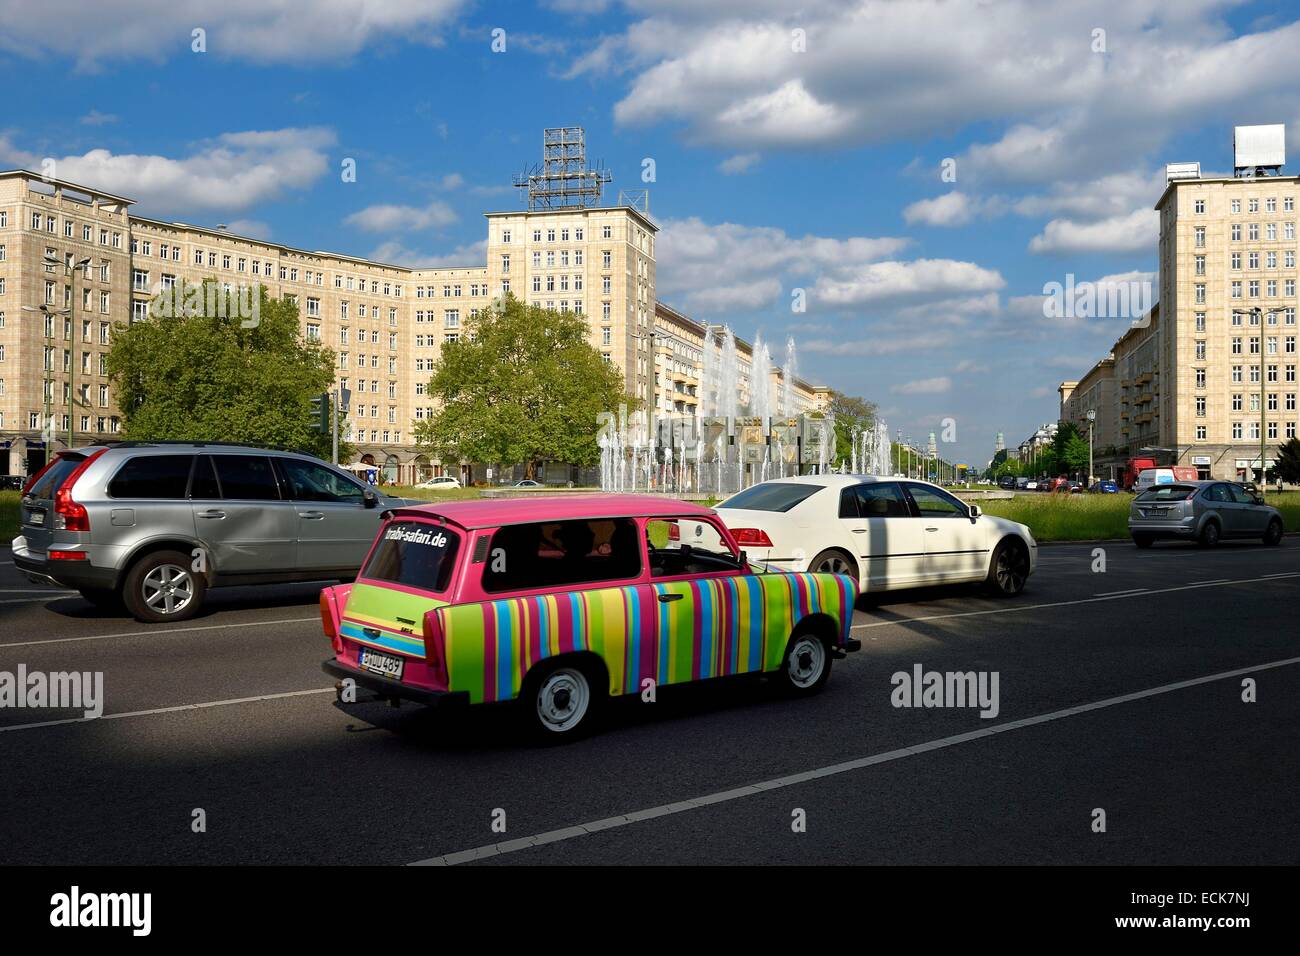 Germany, Berlin, Karl-Marx Allee is the largest artery of the country leading from Alexanderplatz to Frankfurter Tor and the communist regime annually paraded his army there, new look Trabant car Stock Photo